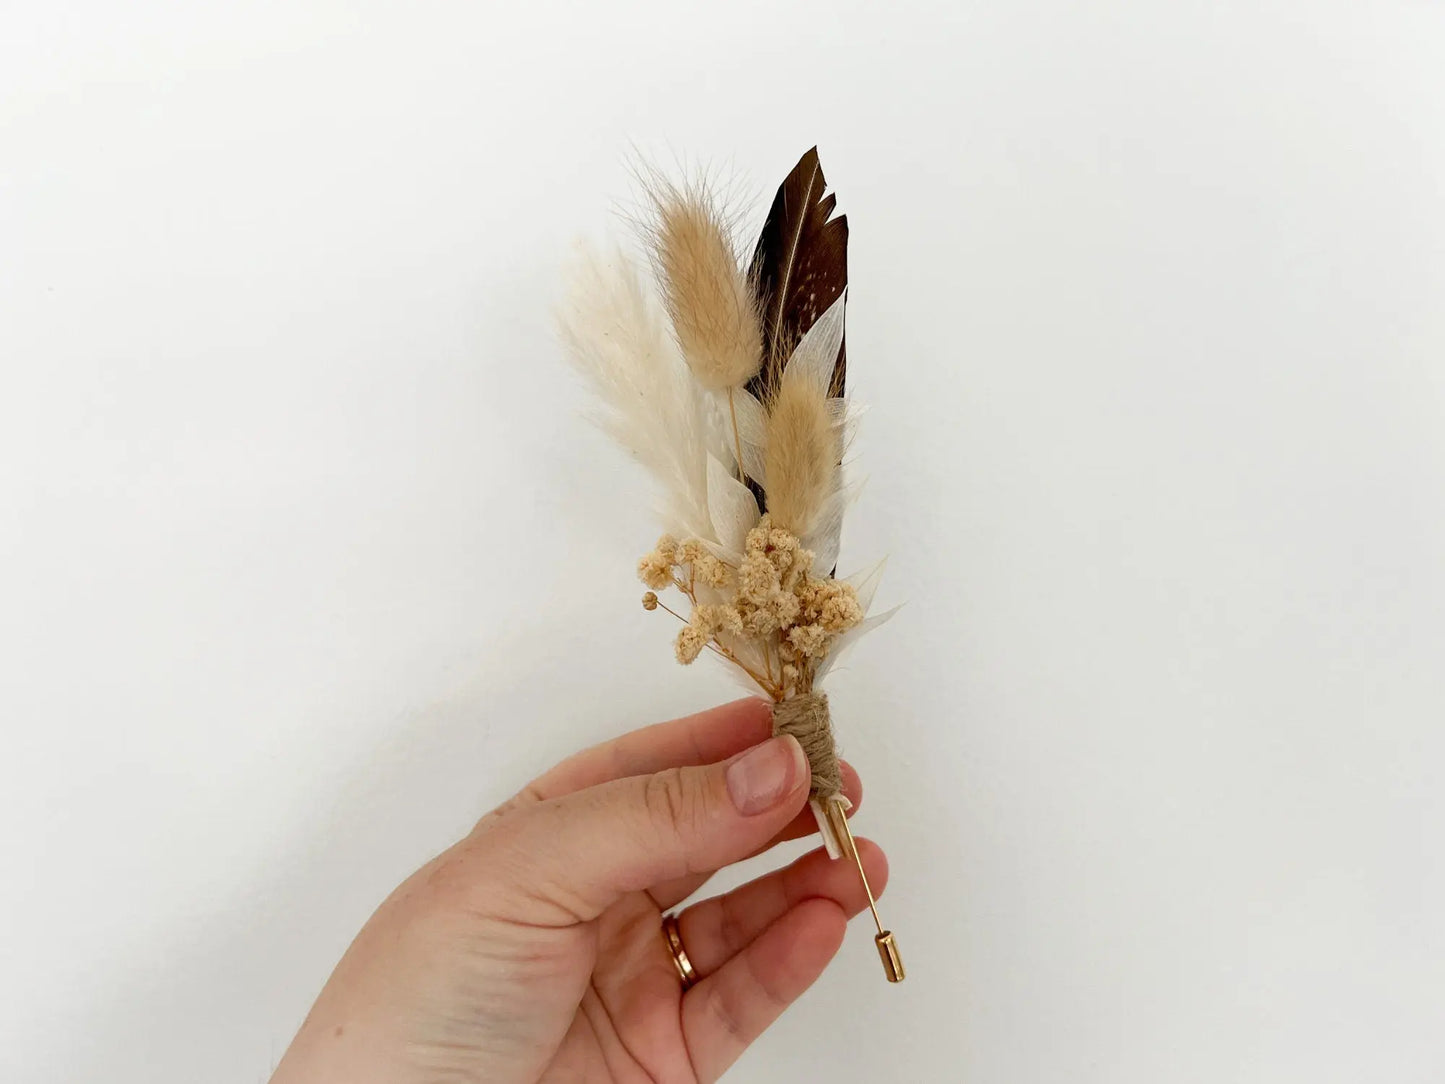 Groom boutonniere with feather and dried wildflowers in boho style